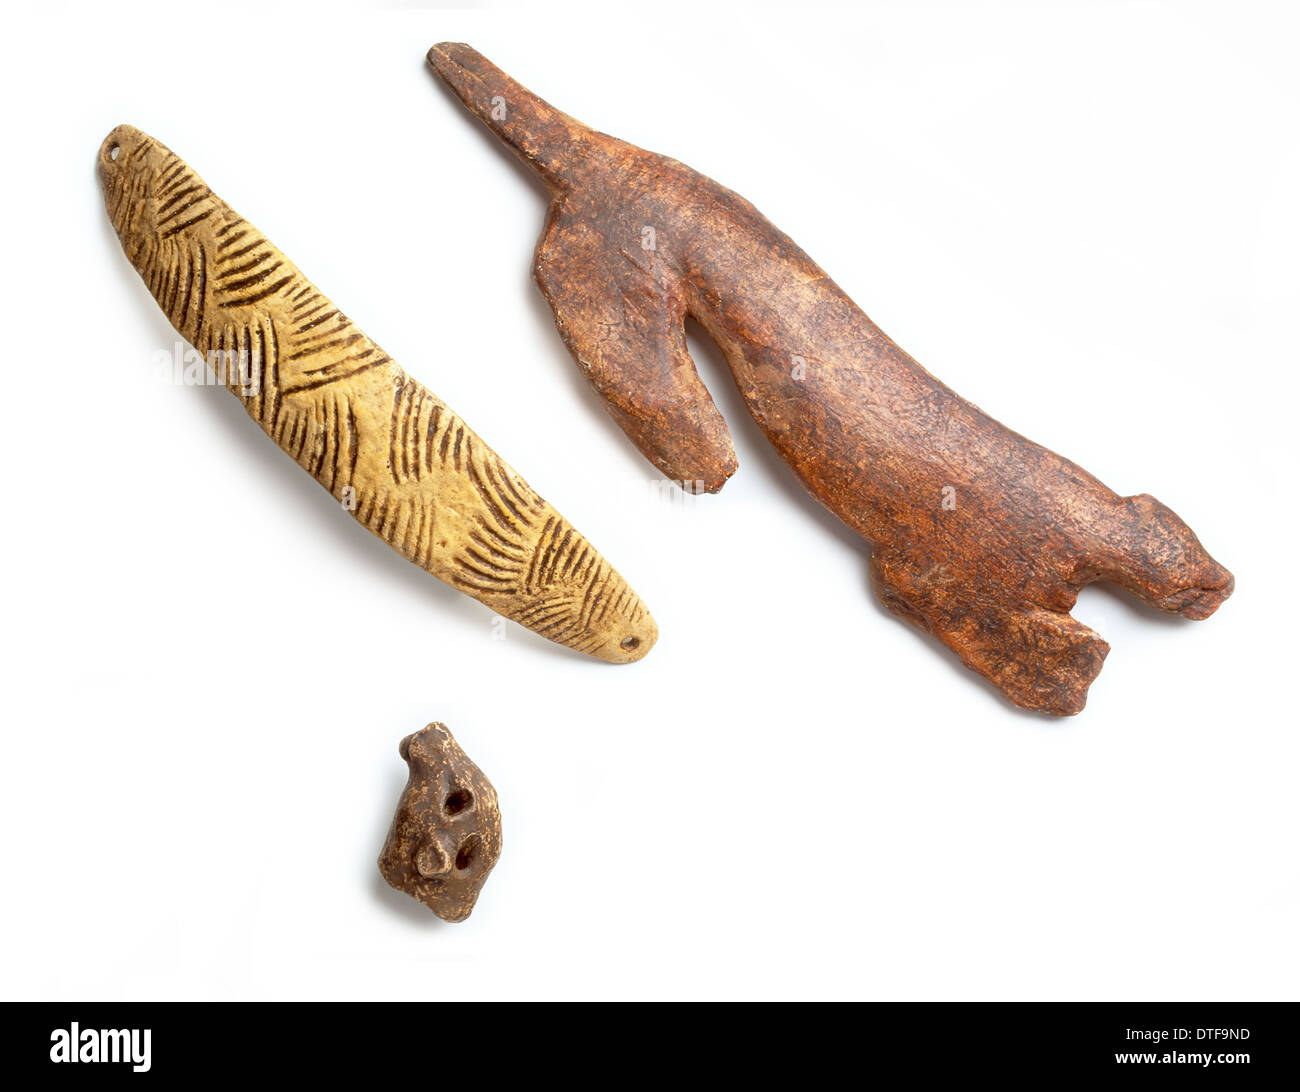 Casts of artifacts from Czech Republic Stock Photo